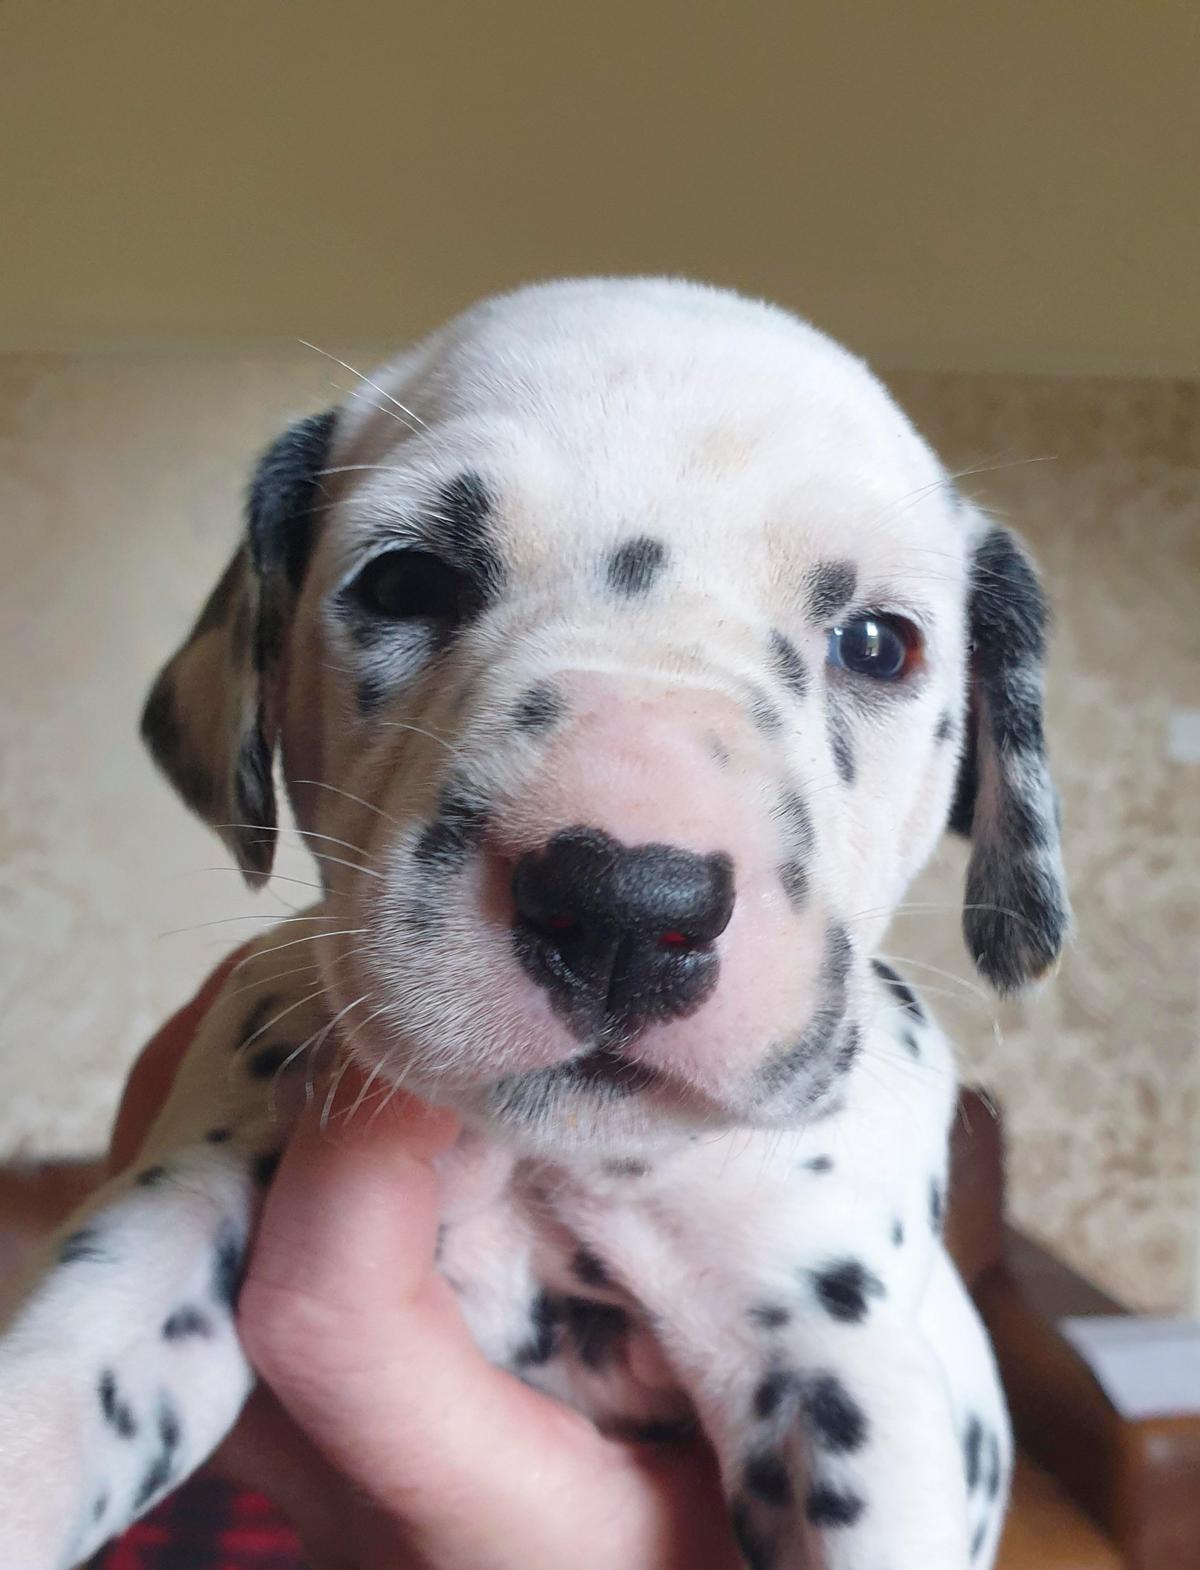 A dalmatian puppy from Nellie's litter. (Caters News)